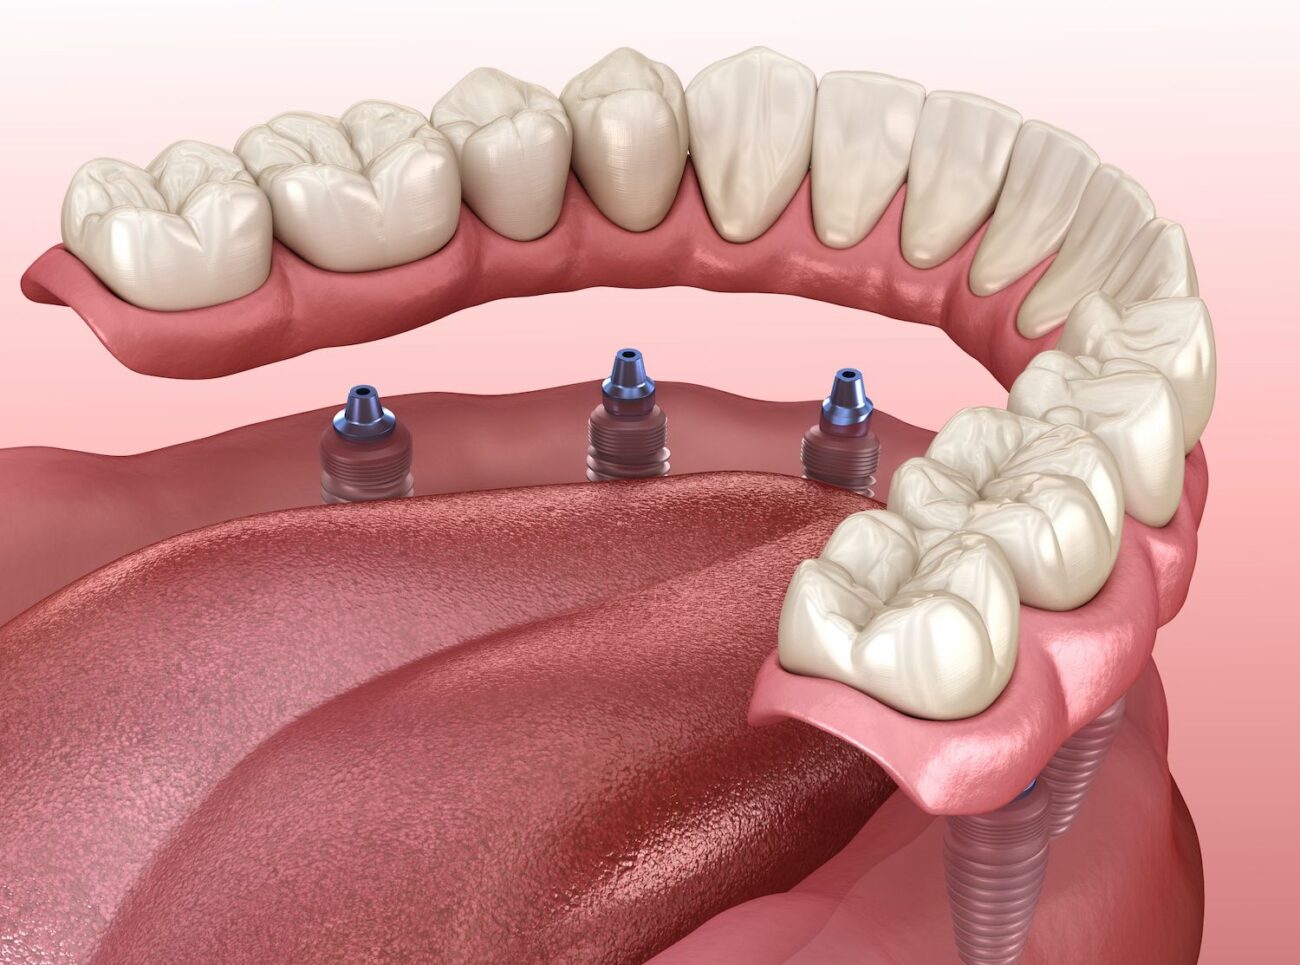 protect dental implants with dentist advice